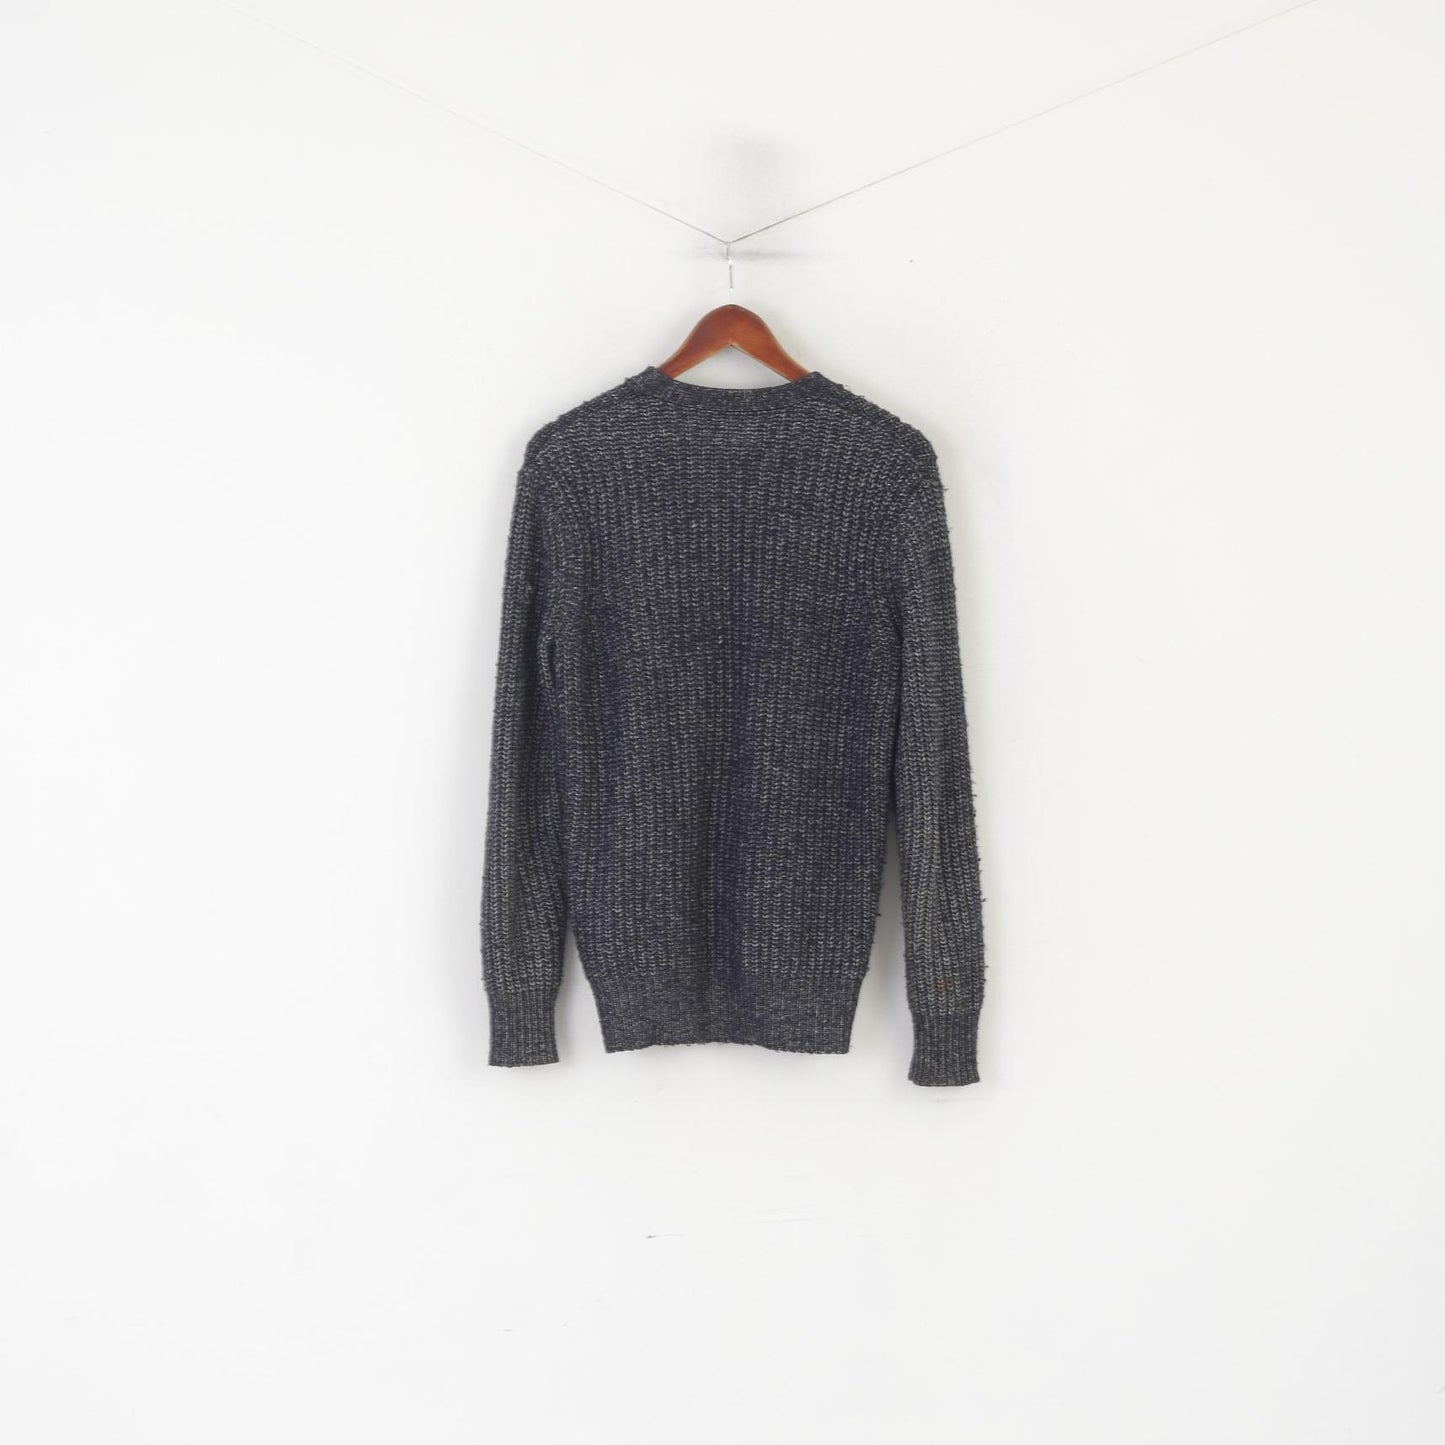 AllSaints Hommes XS Cardigan Marine Coton Tricot Style Stanmer Boutons Détaillés Pull